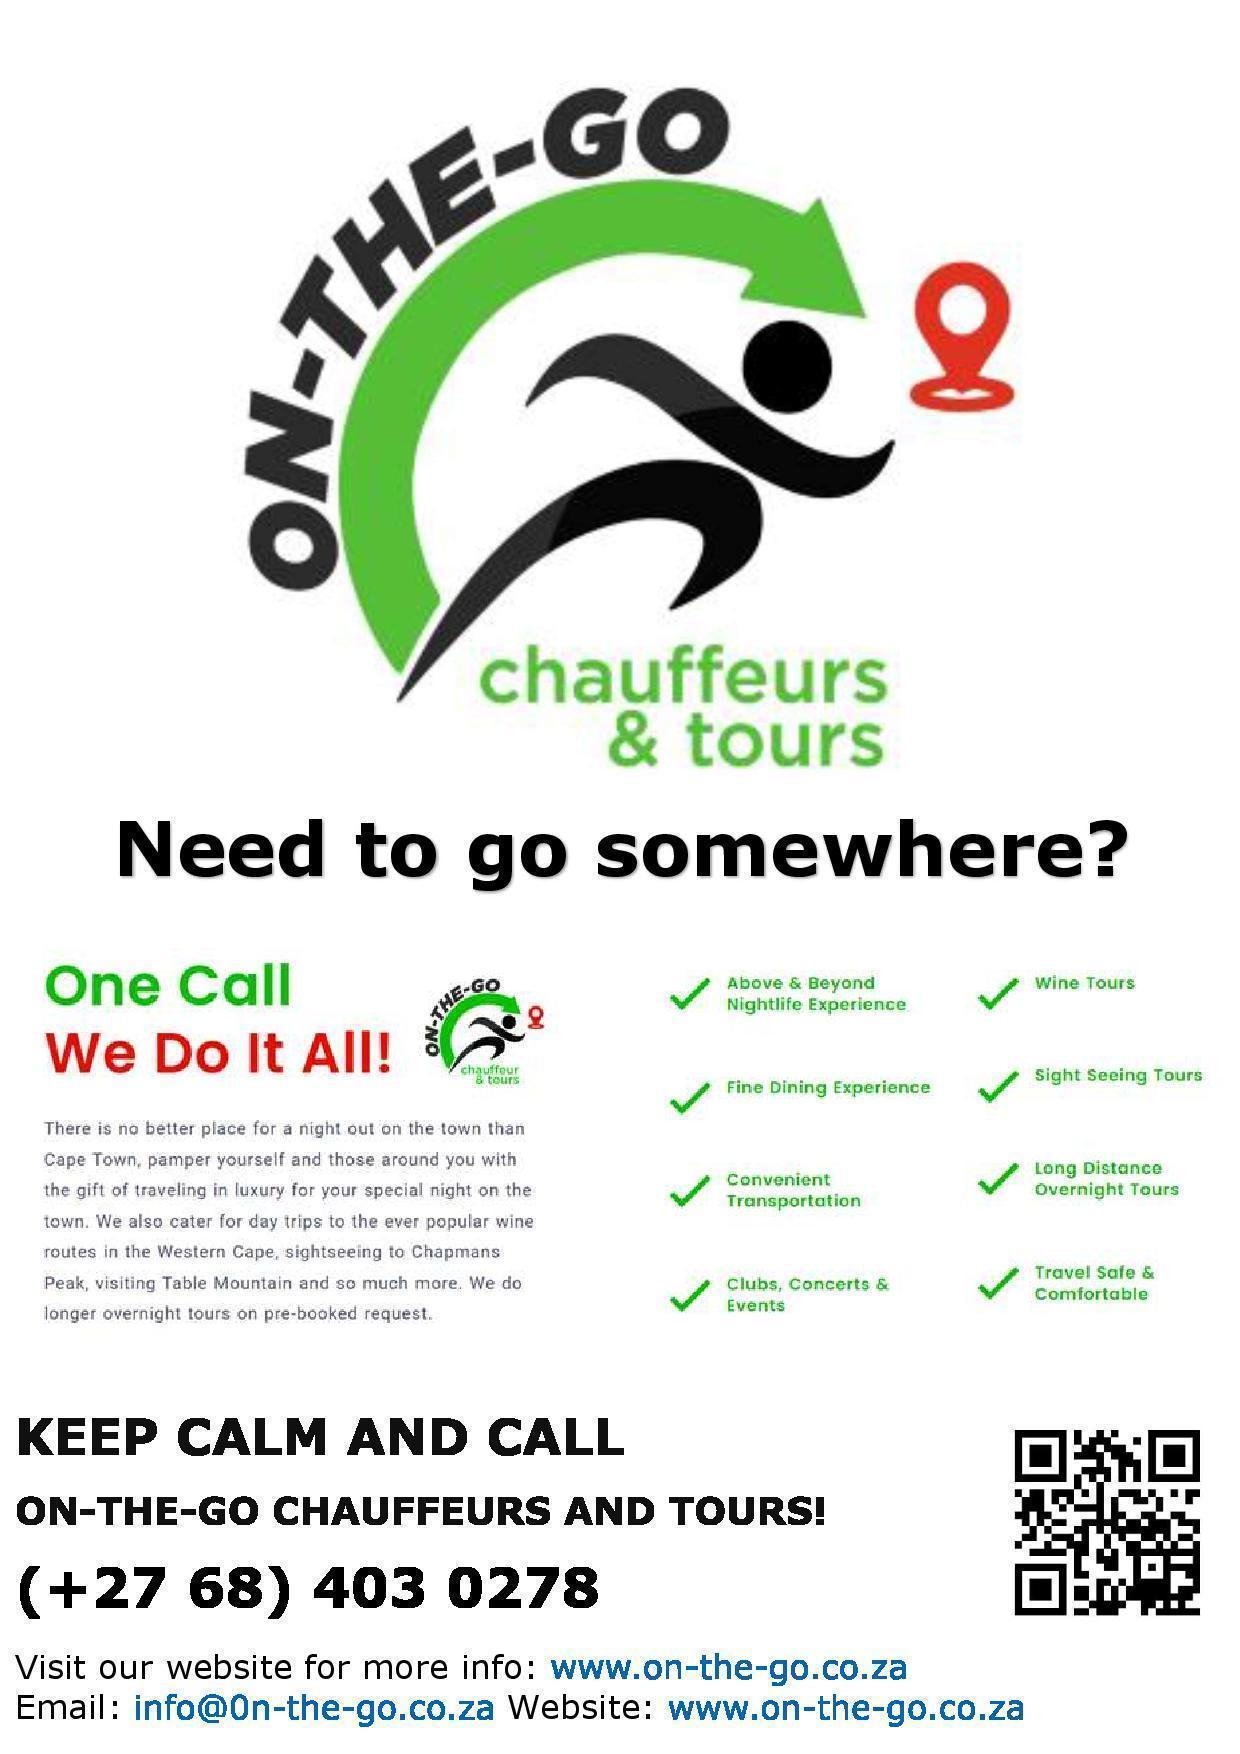 On the Go Chauffeurs and Tours